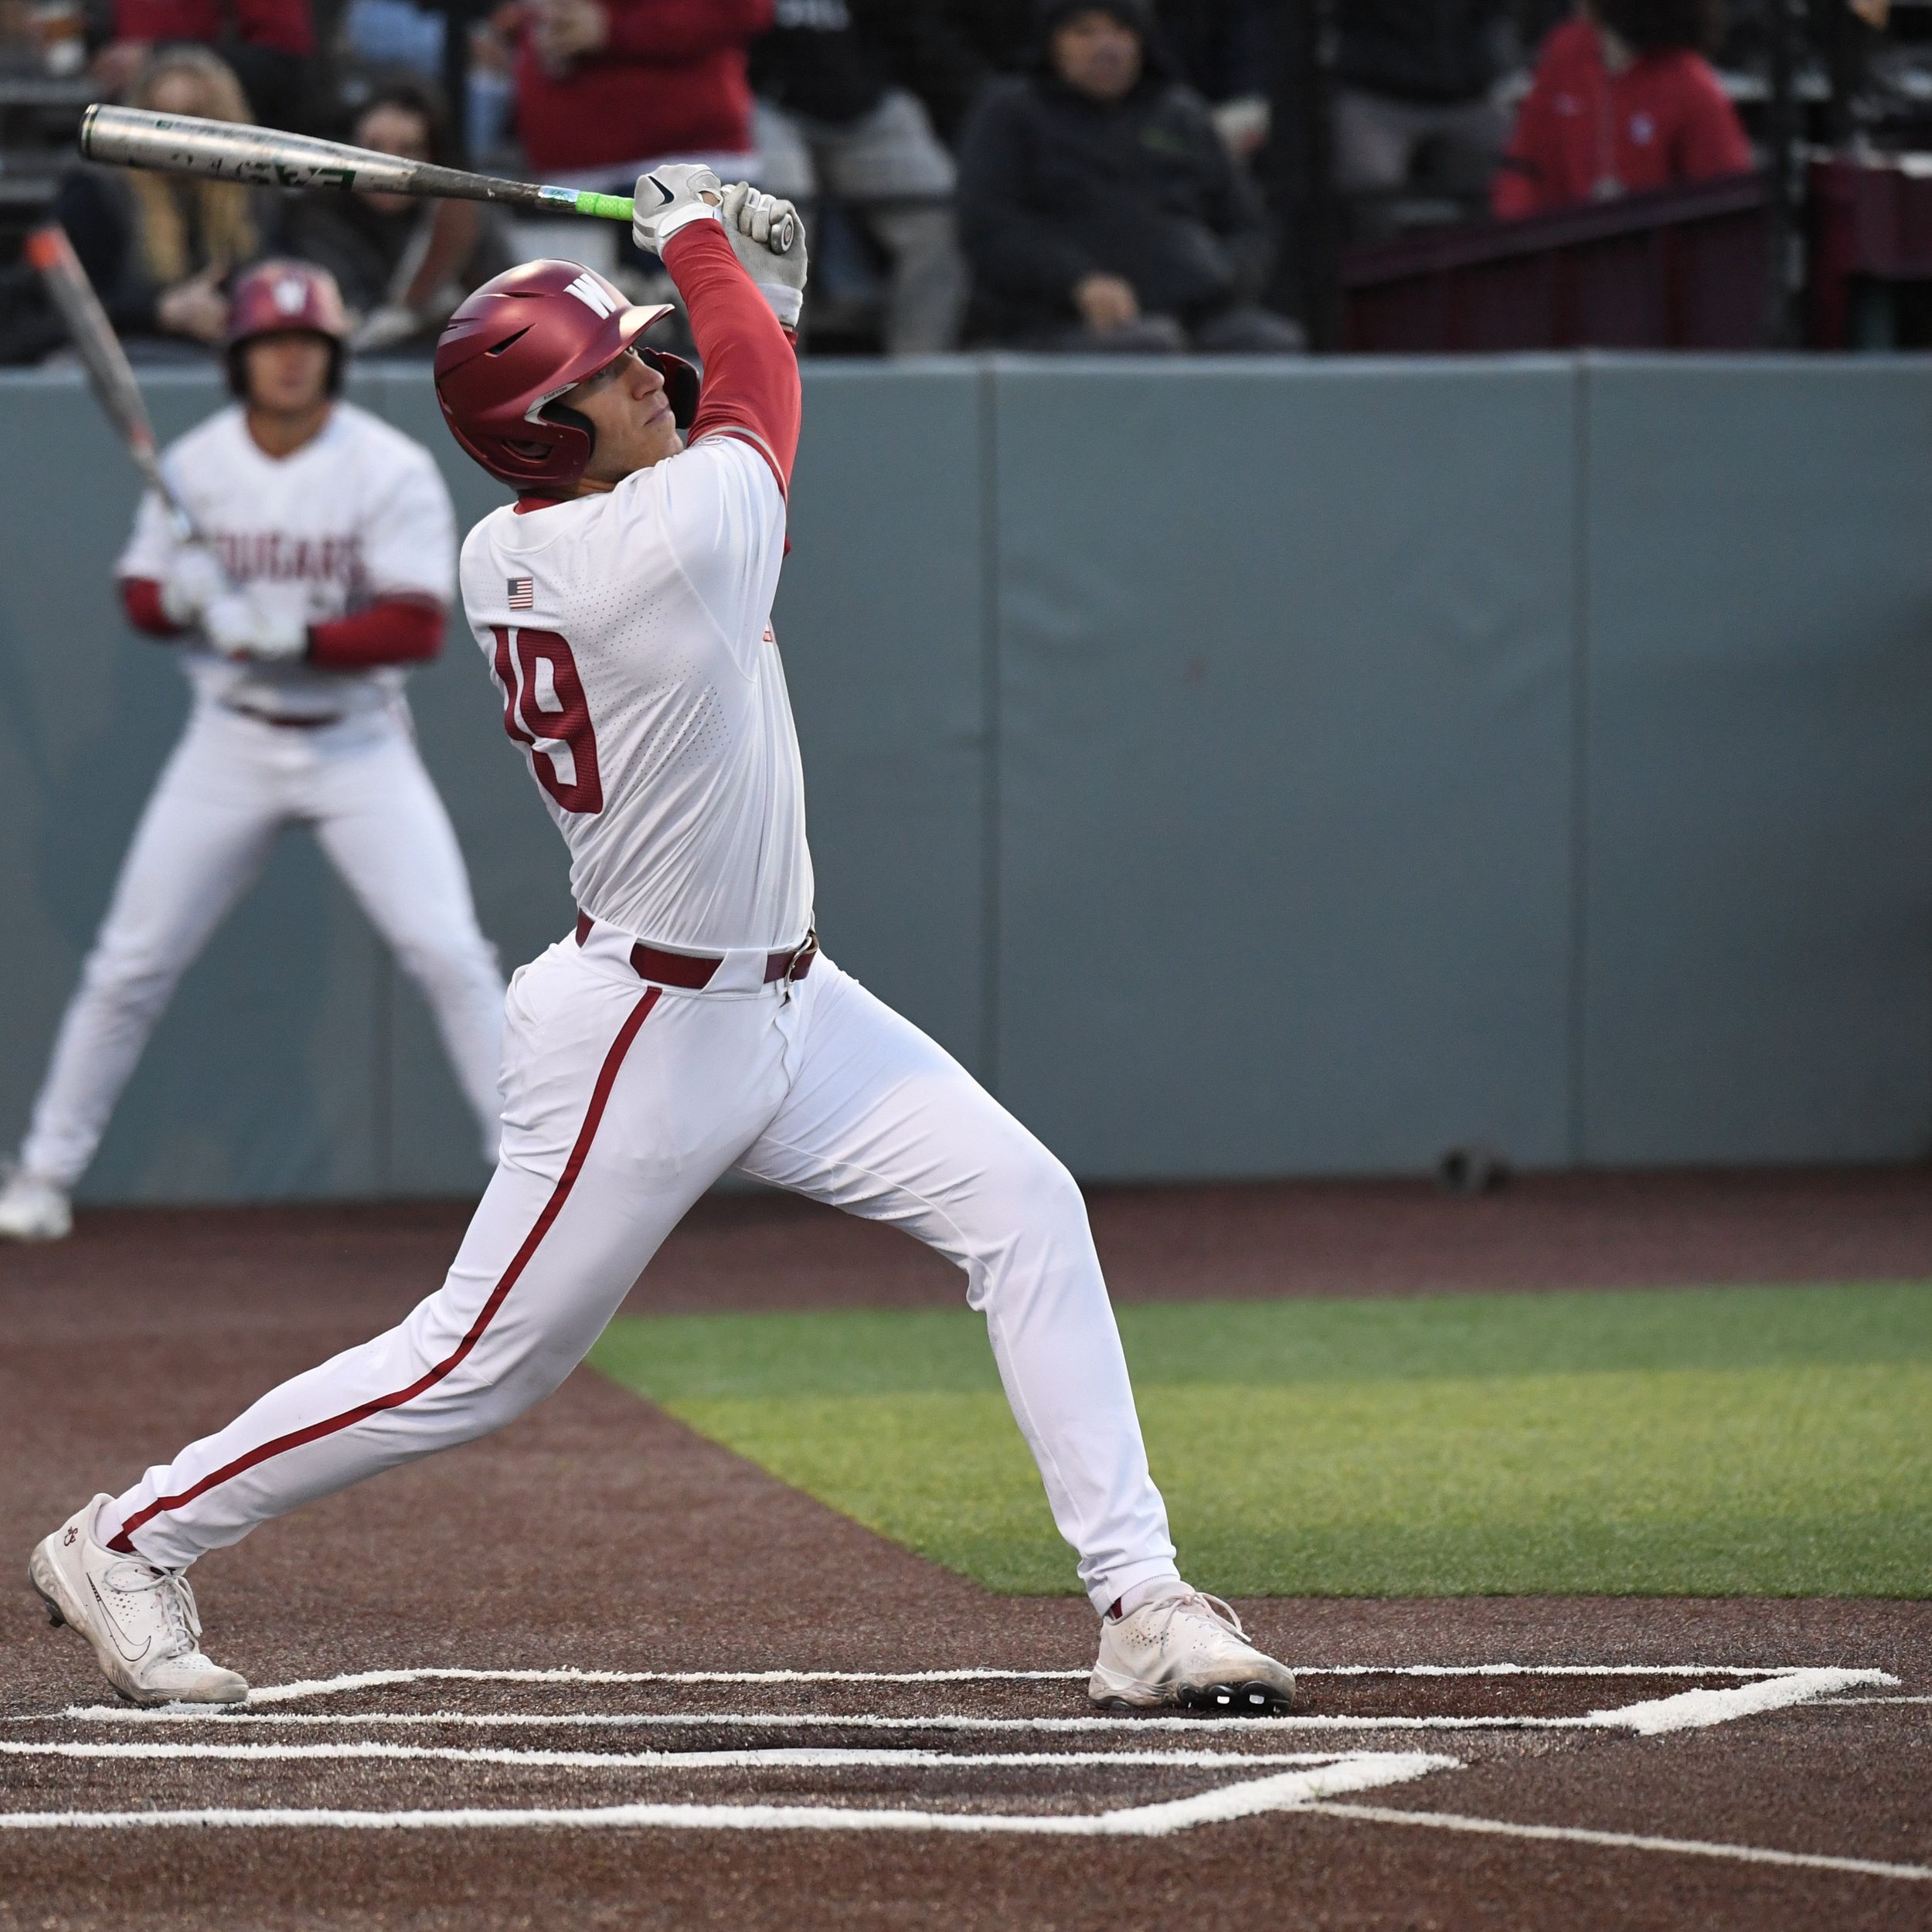 Washington State baseball picked 10th in Pac-12 coaches poll